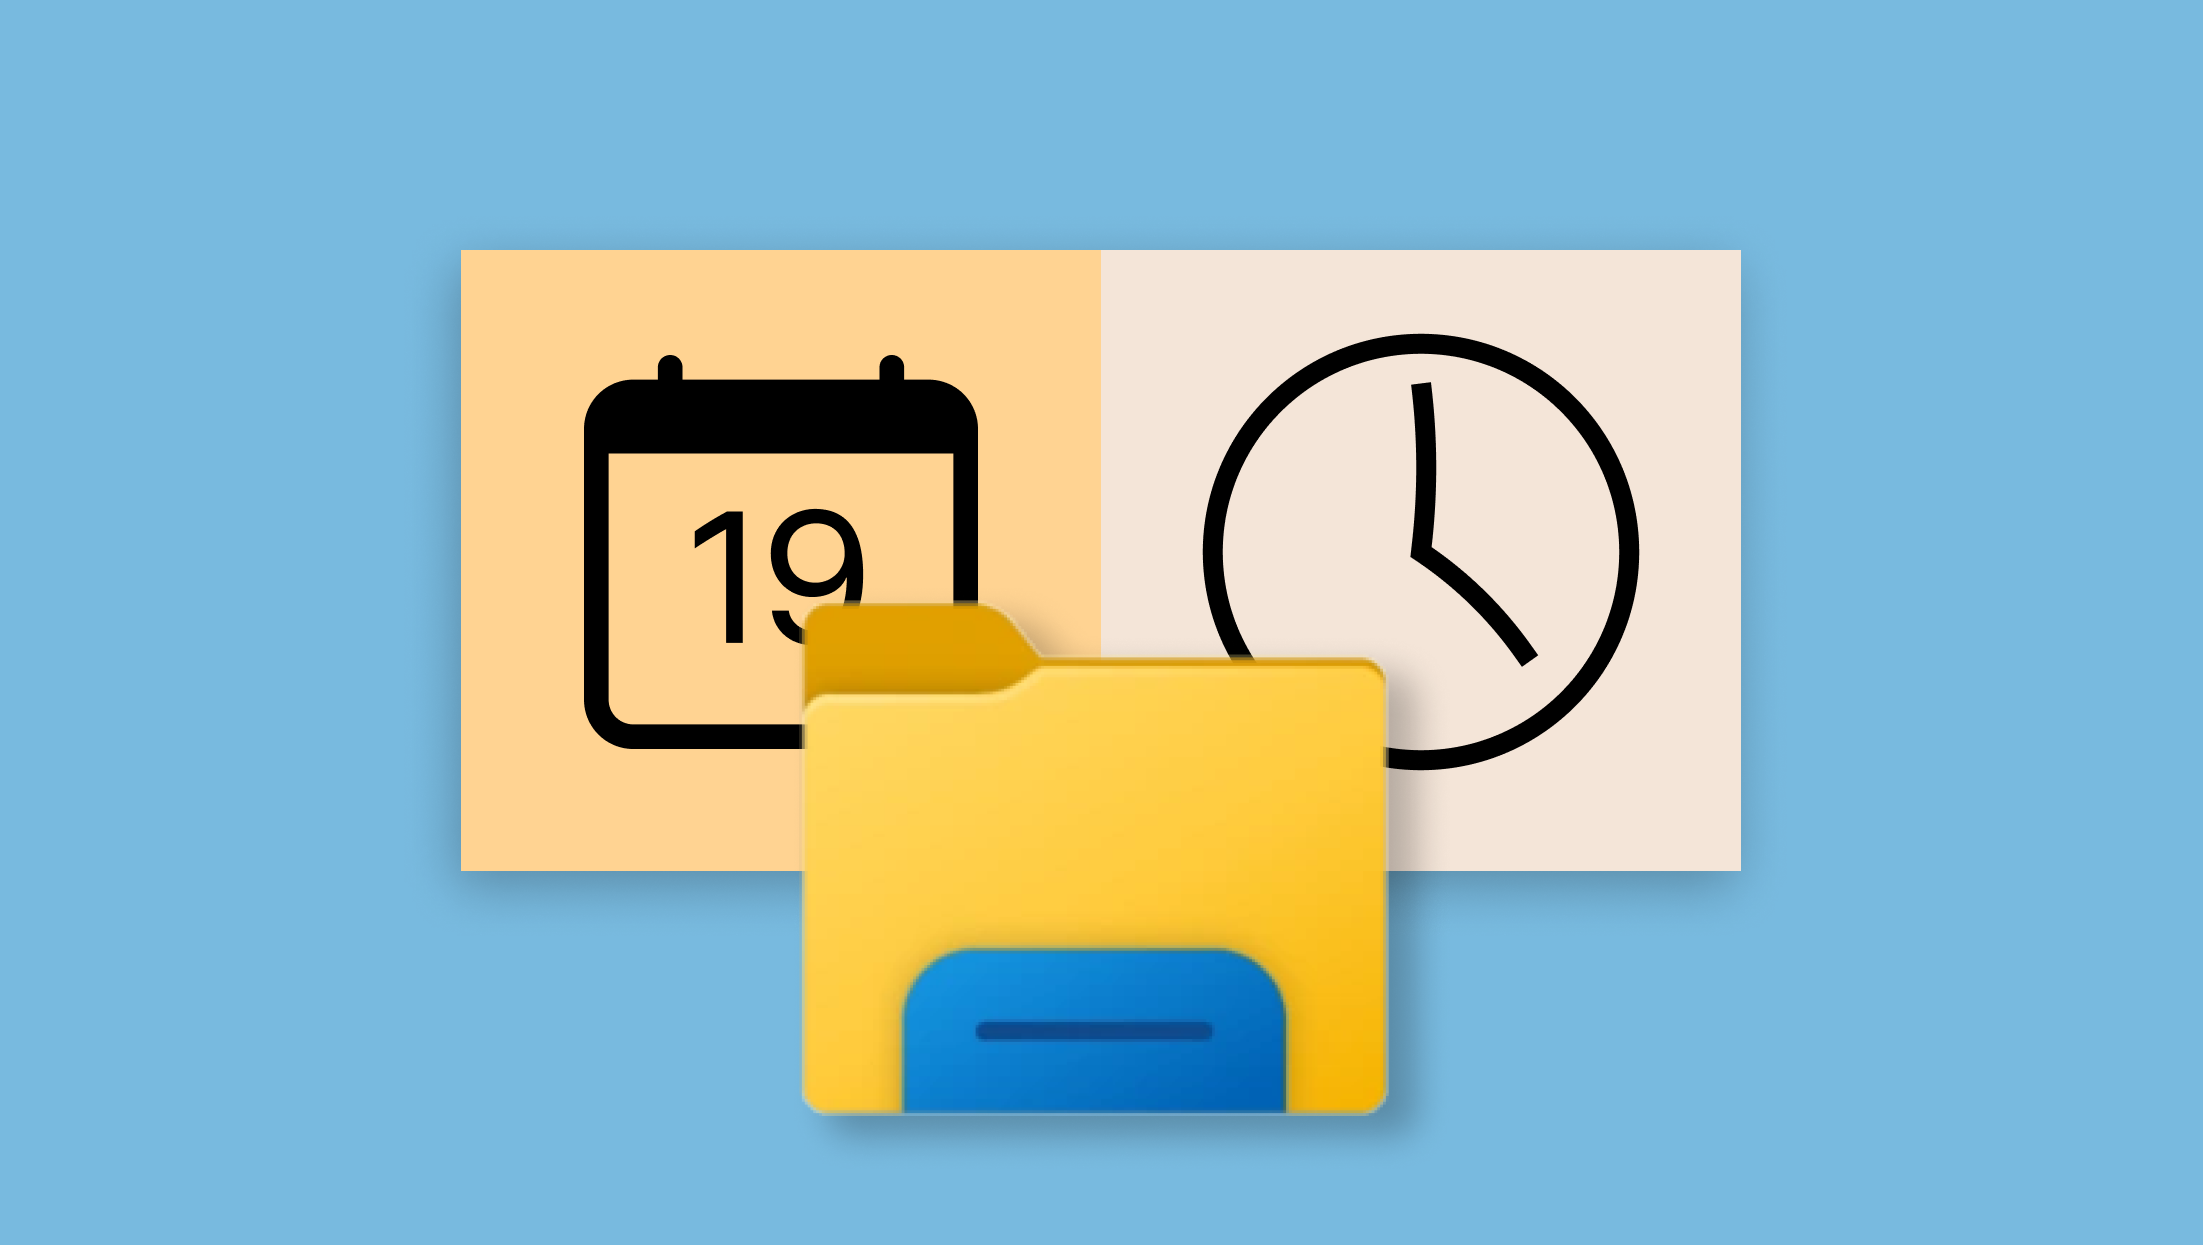 A clock and calendar icon behind the File Explorer icon